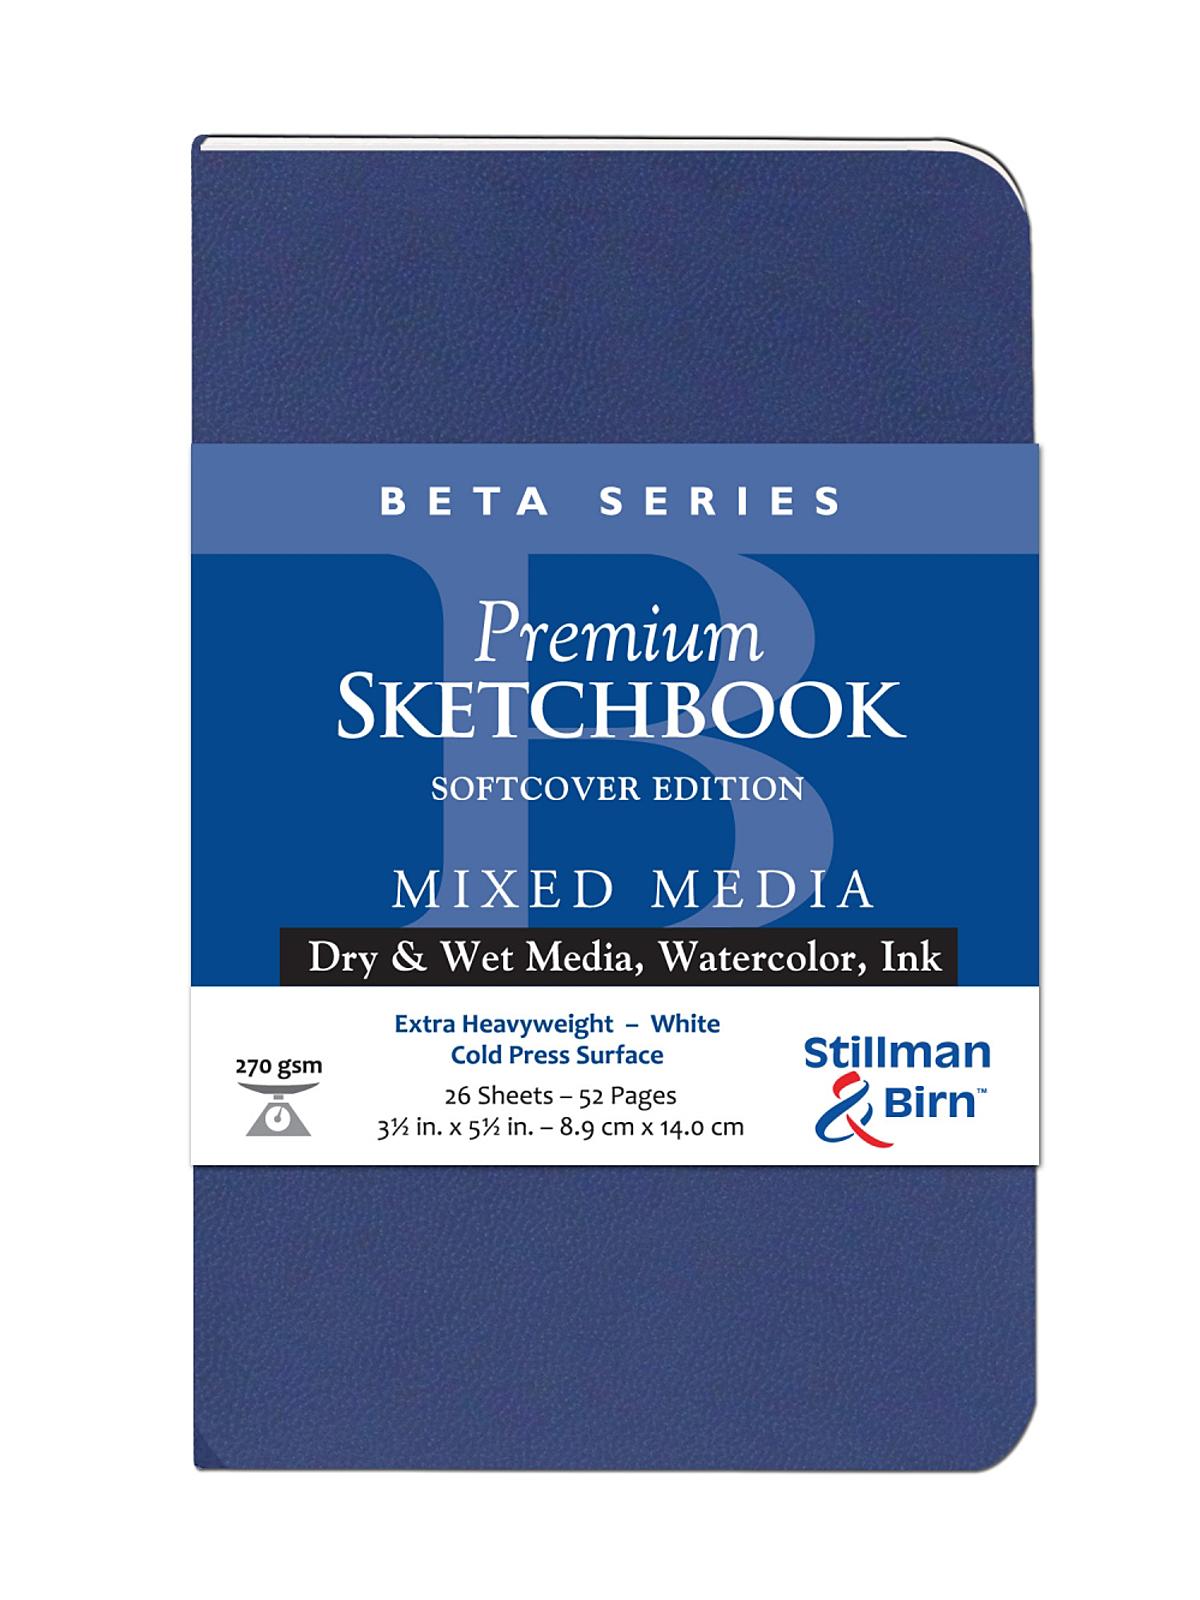 Beta Series Softcover Sketchbook 3.5 In. X 5.5 In. Portrait 56 Pages